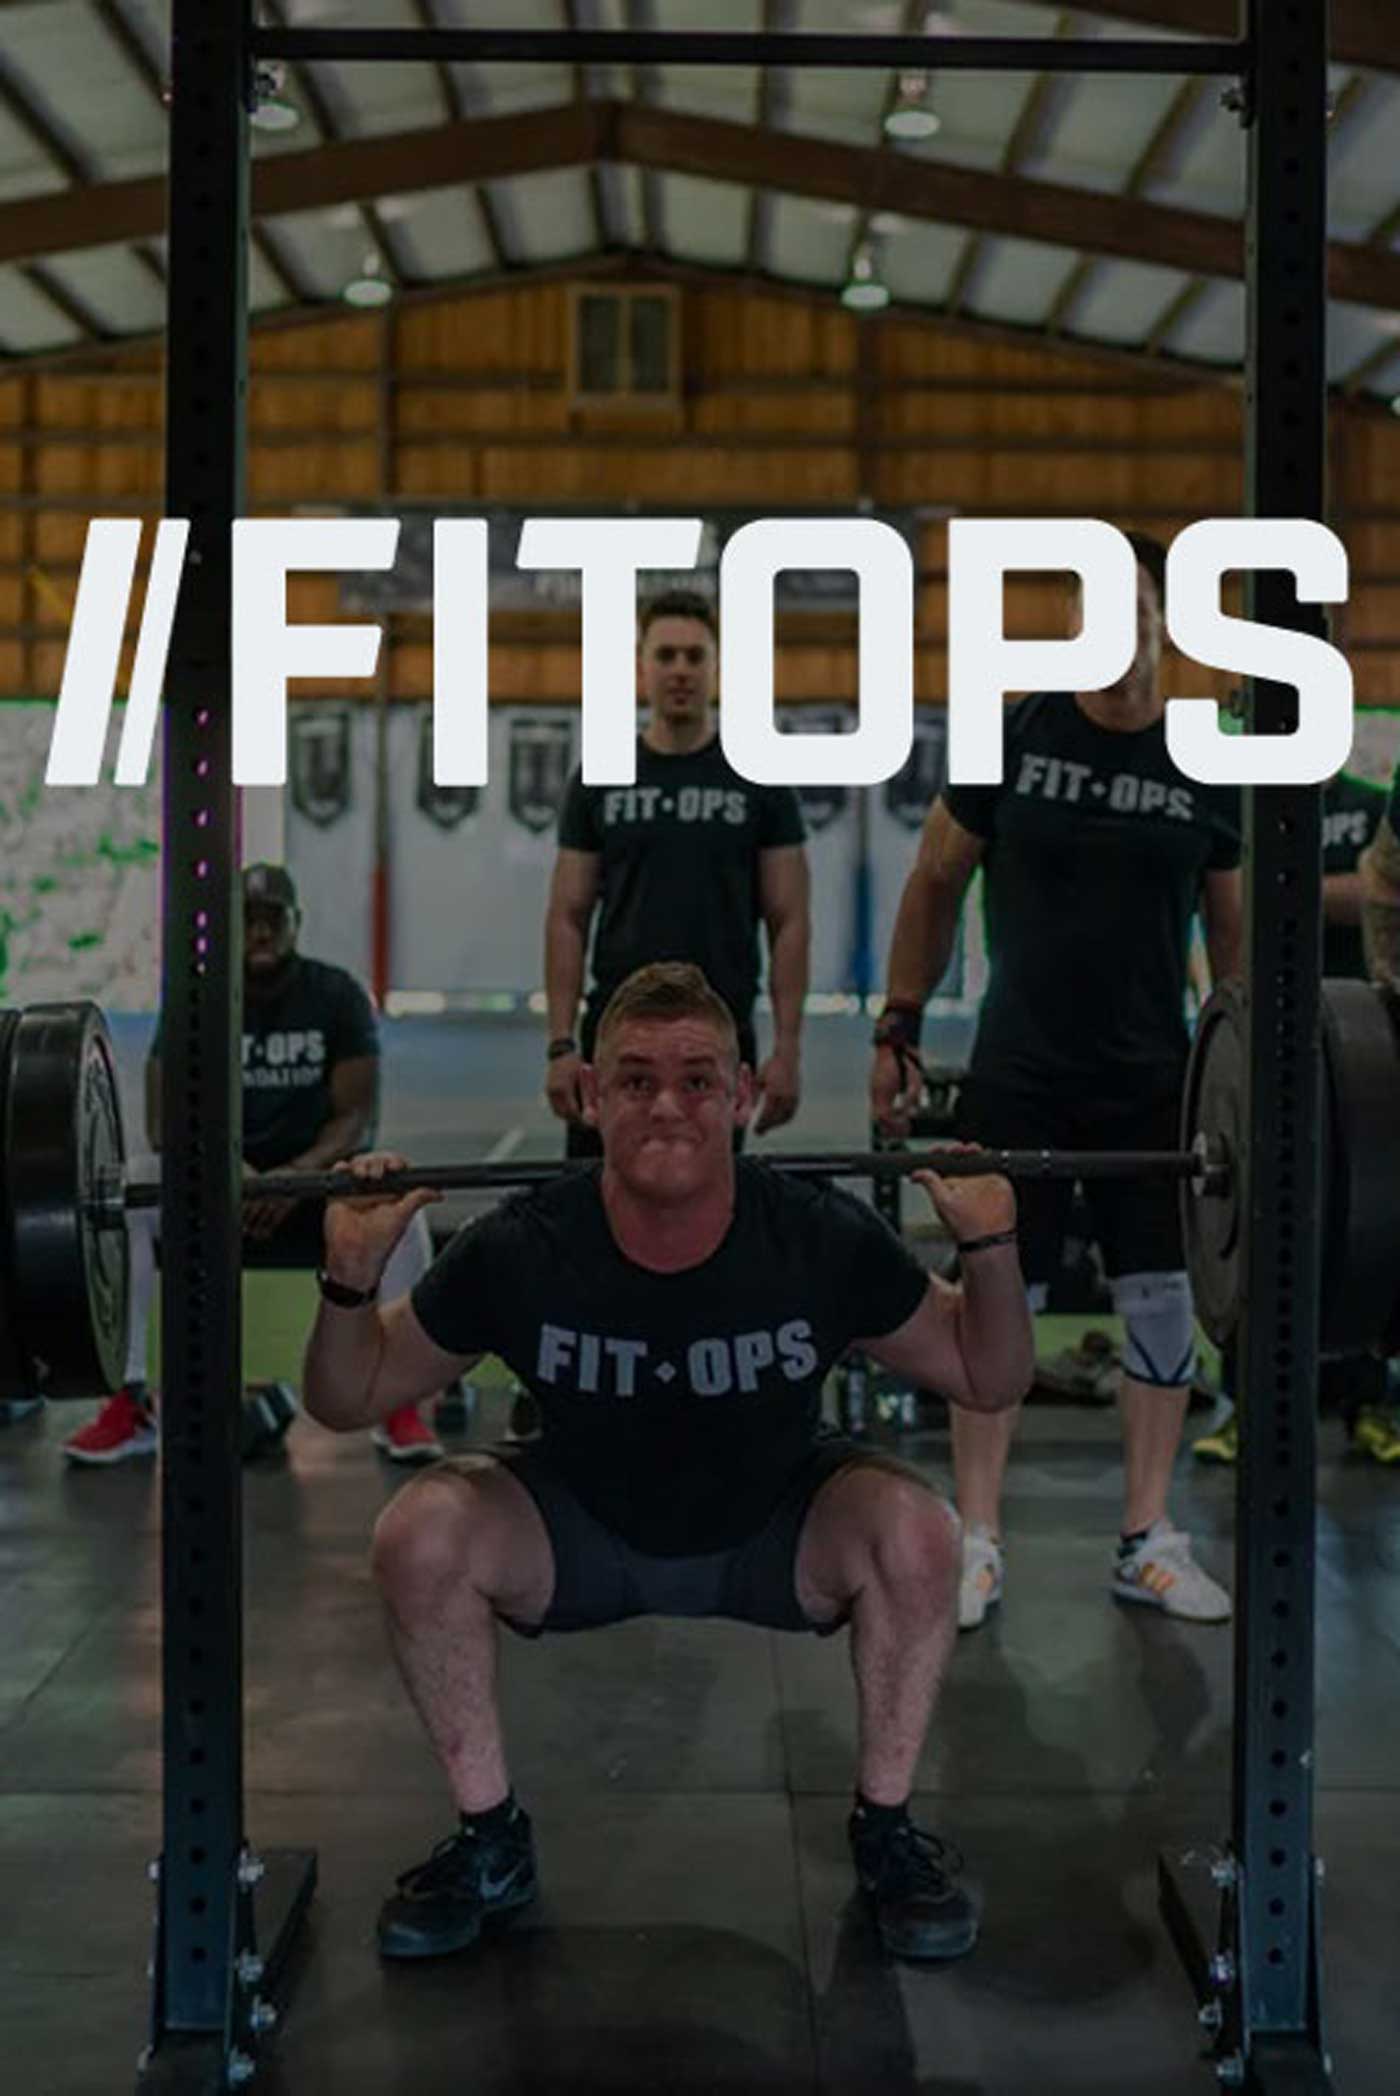 A member of the fitops team does a squat with weights on his shoulders. The FITOPS logo overlays on top of the image.